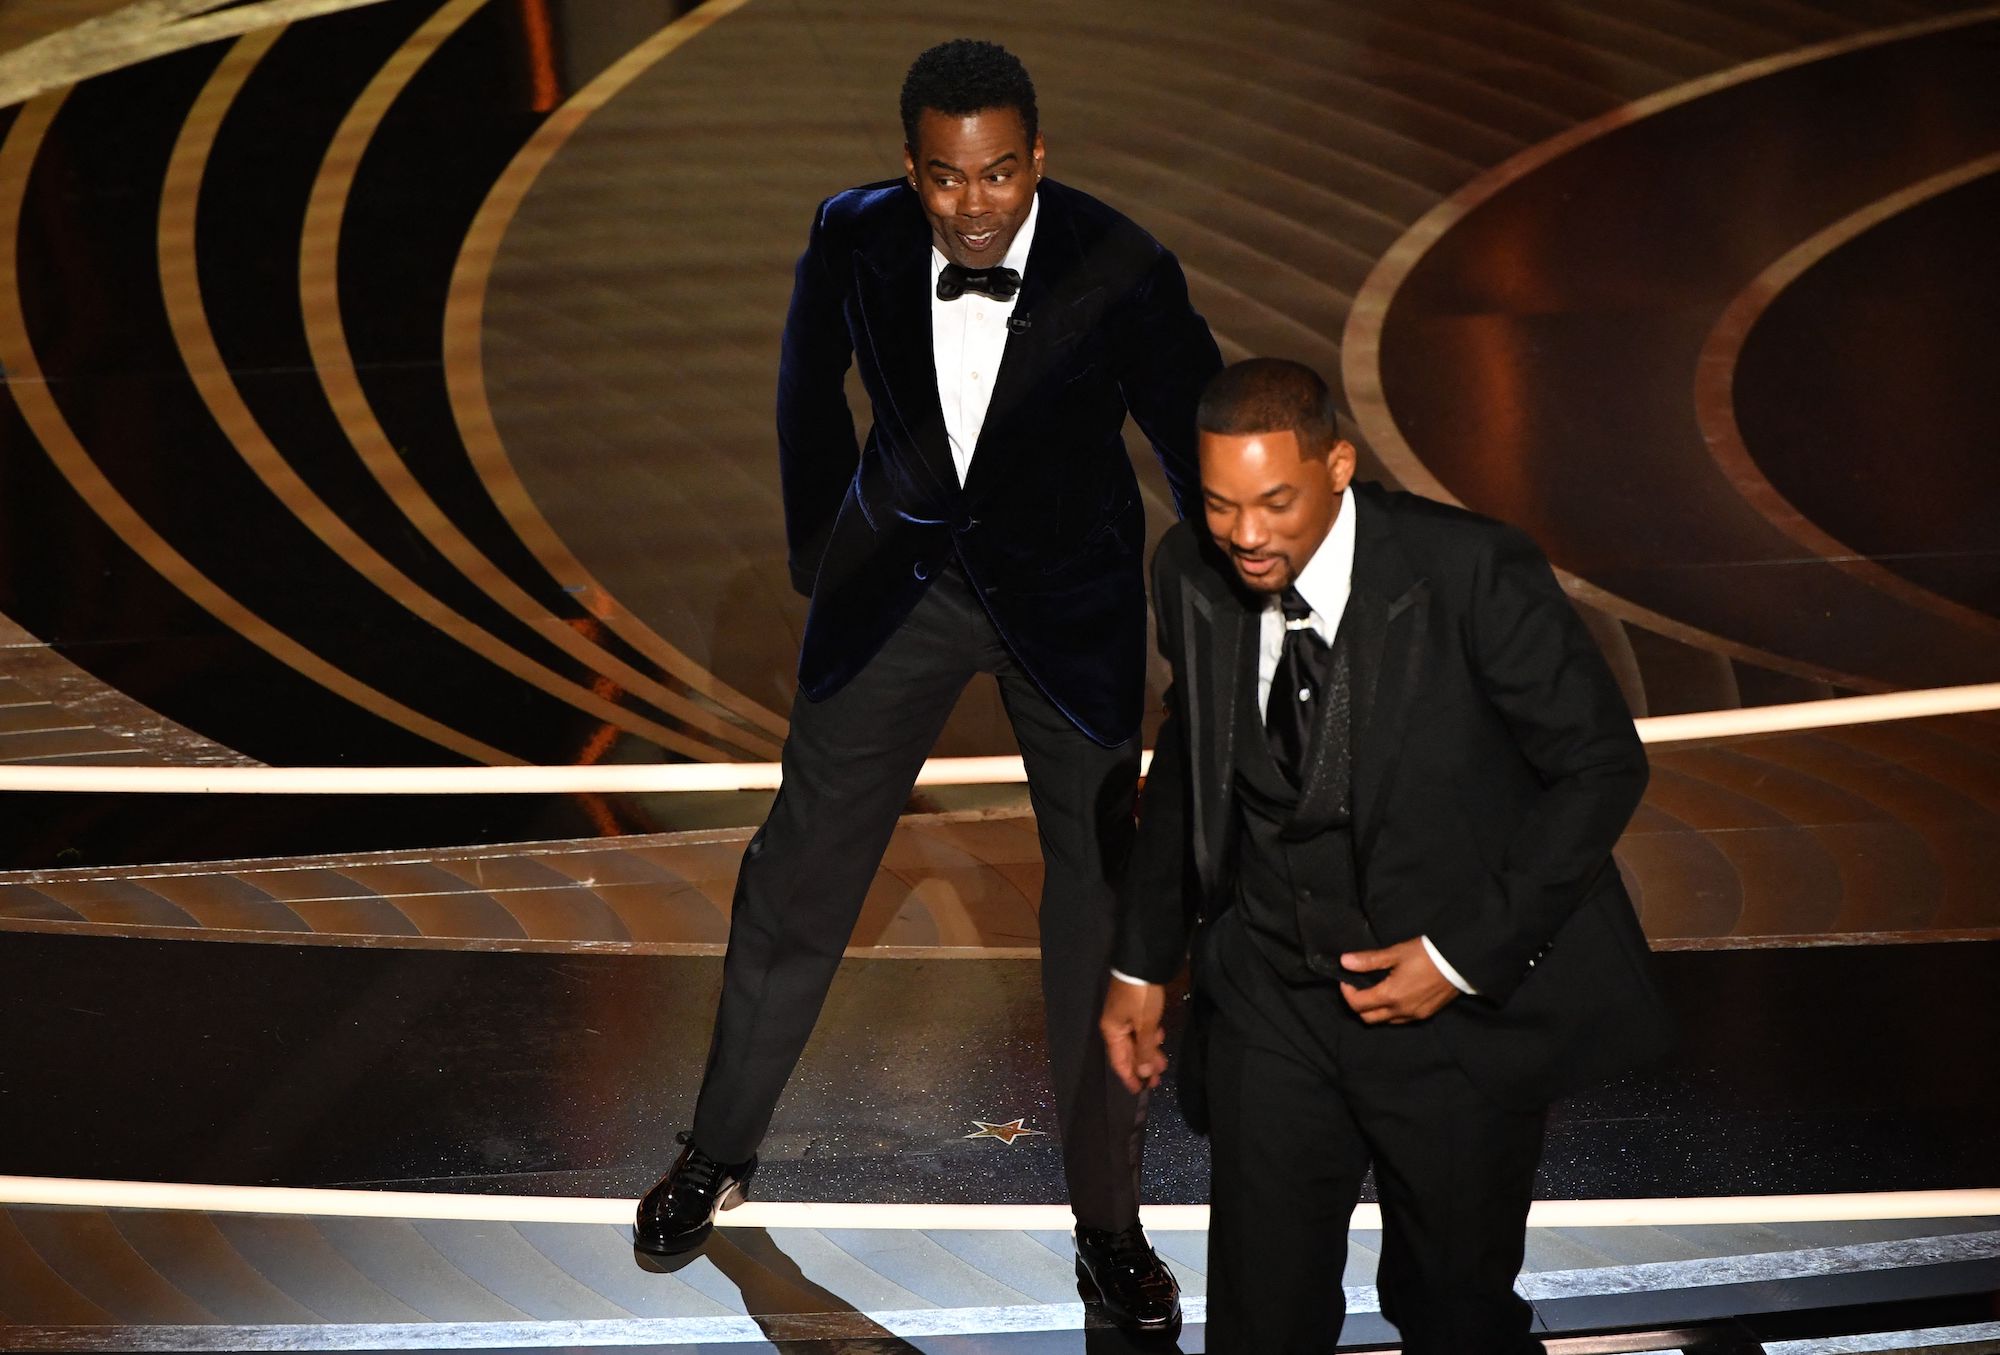 Will Smith walks away after slapping Chris Rock at the Oscars